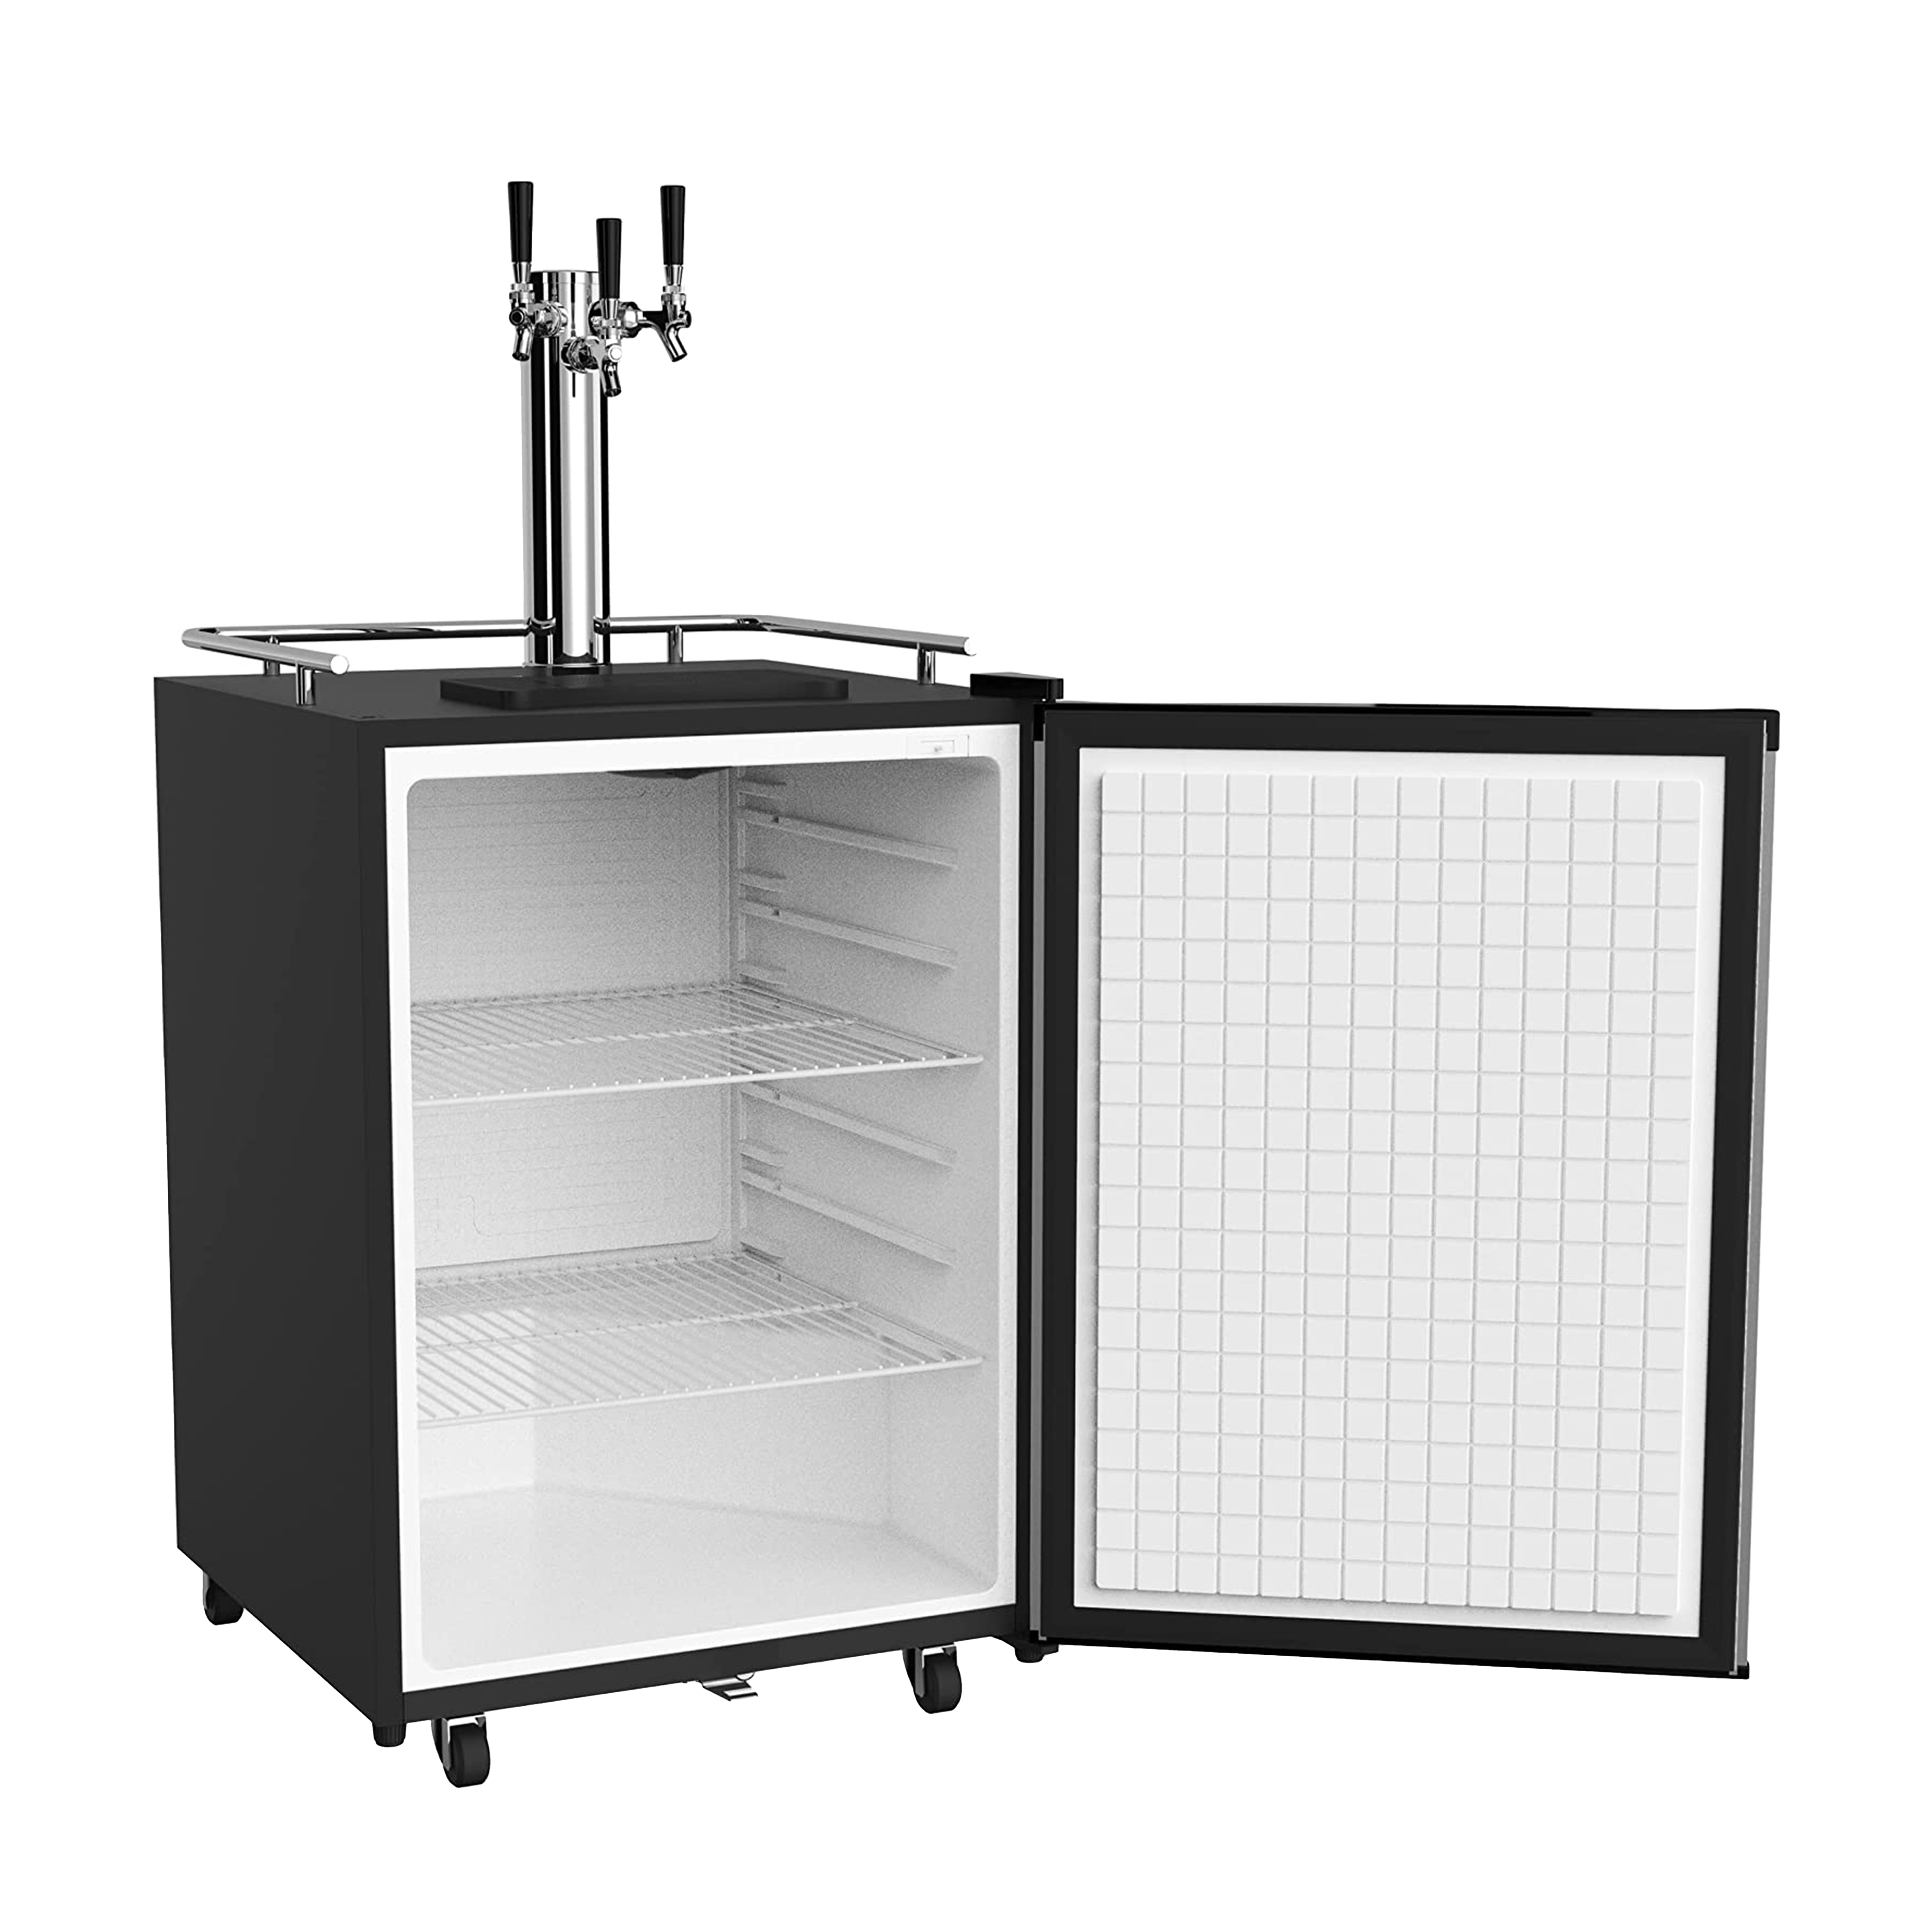 Side view of a 6.53 Cu Ft Stainless Steel Outdoor Kegerator Refrigerator with the door open, showcasing interior space with two wire shelves